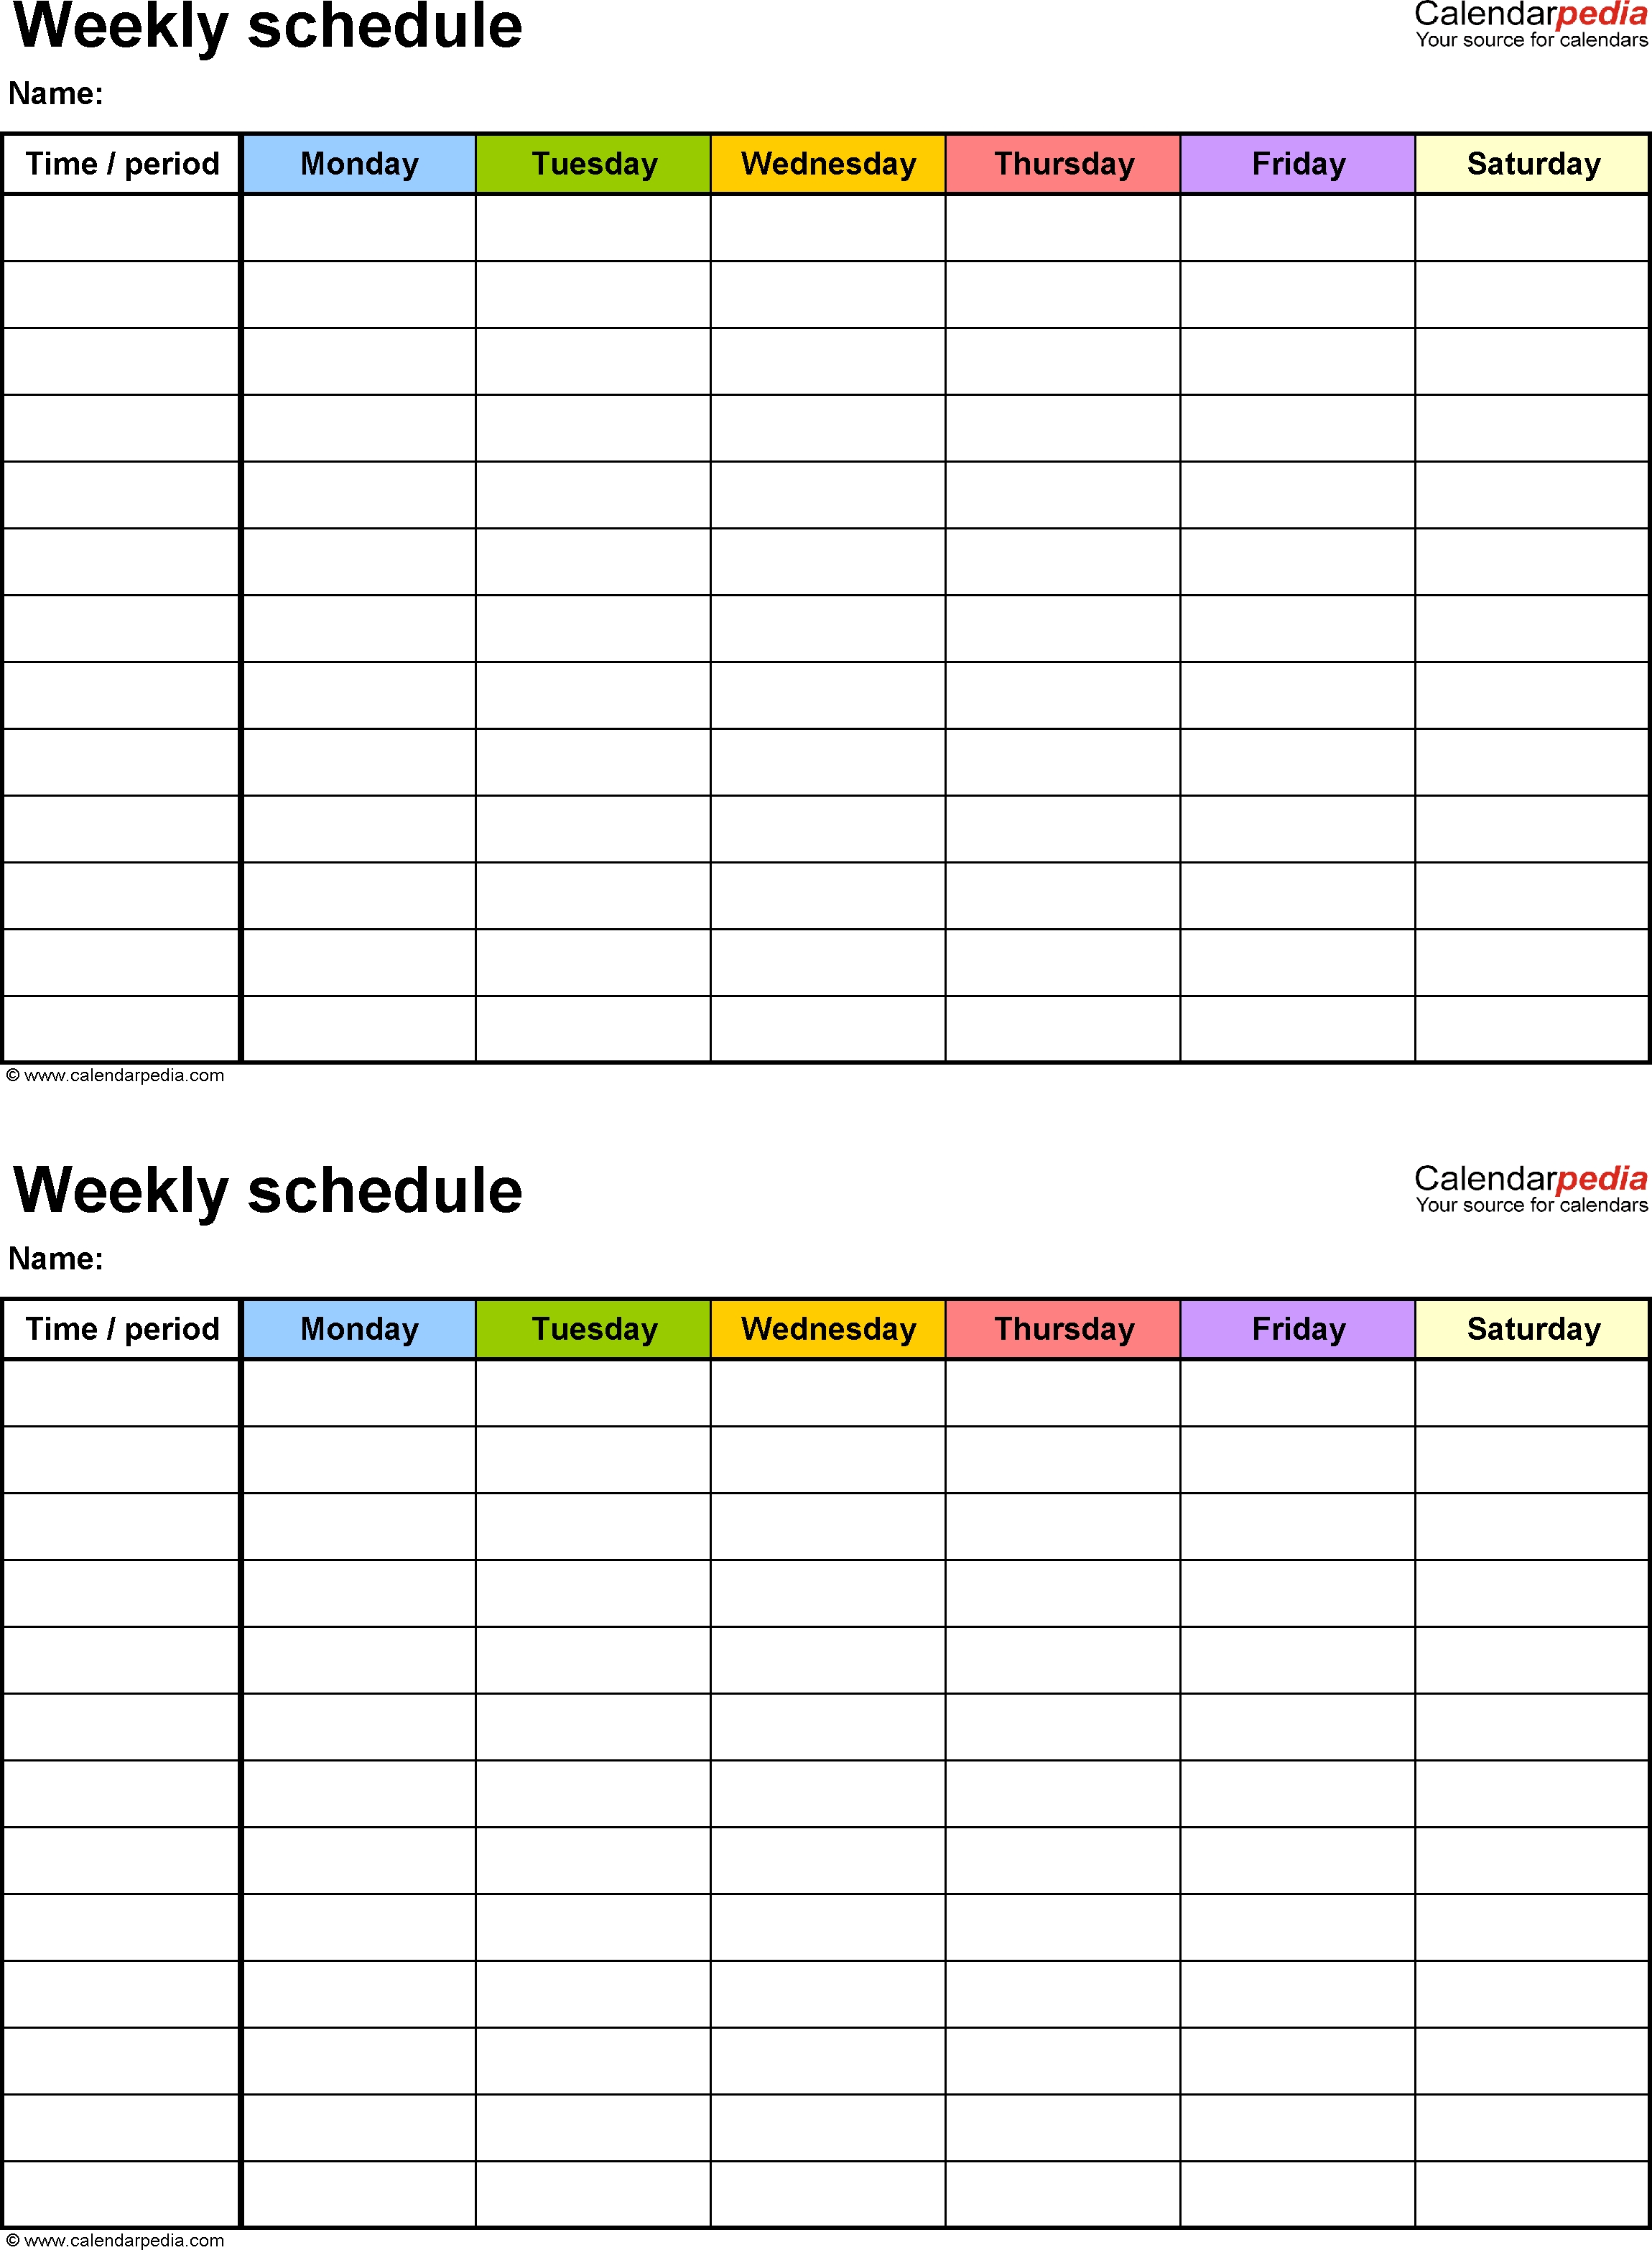 Free Weekly Schedule Templates For Word - 18 Templates within Free Seven Day Printable Calendar